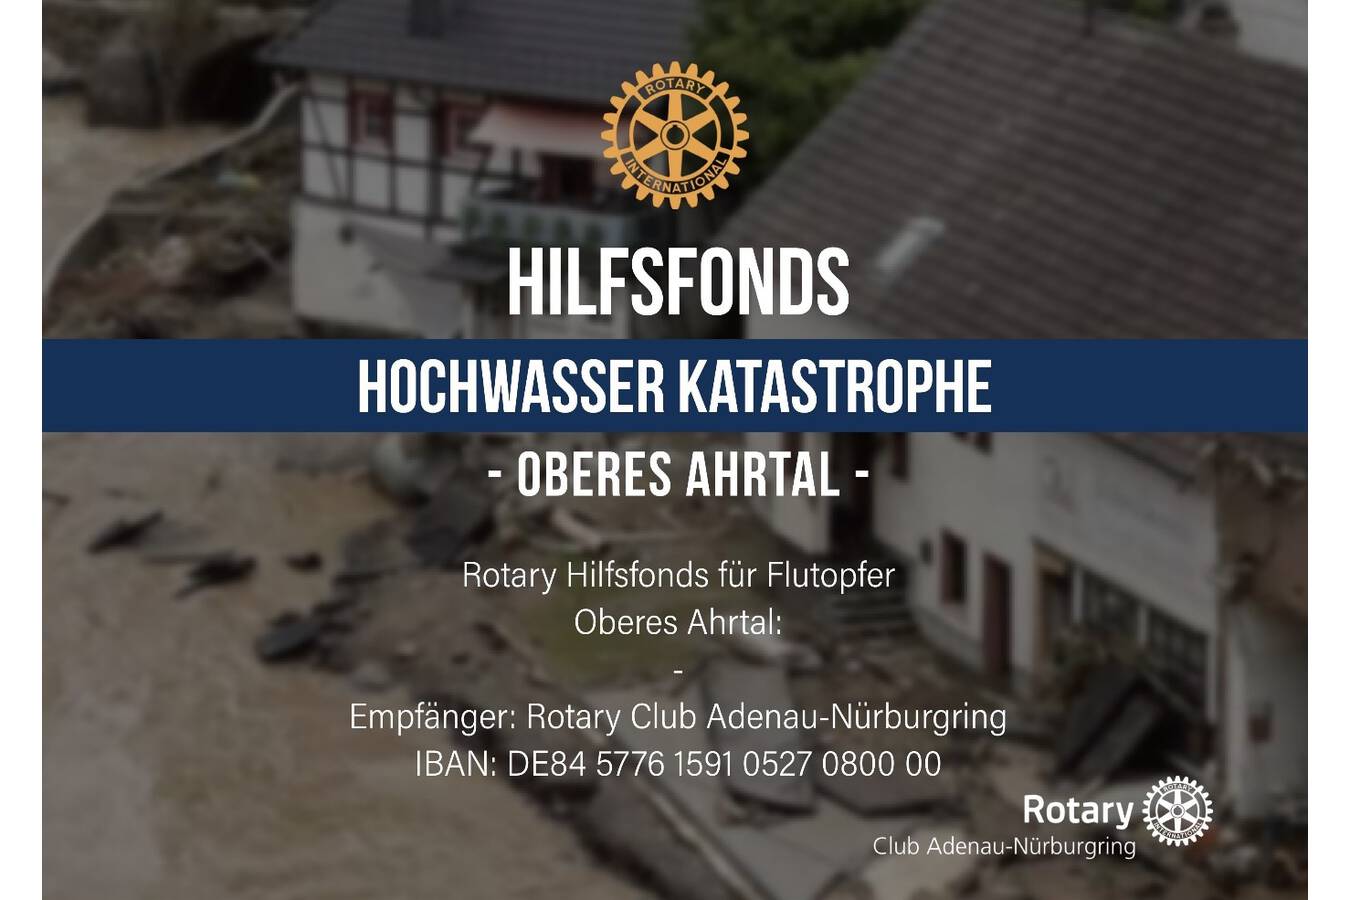 Together after devastating floods in the Eifel and Ahr valley region We AHR together; Köllemann GmbH has donated a generous amount to the Rotary relief fund for flood victims.